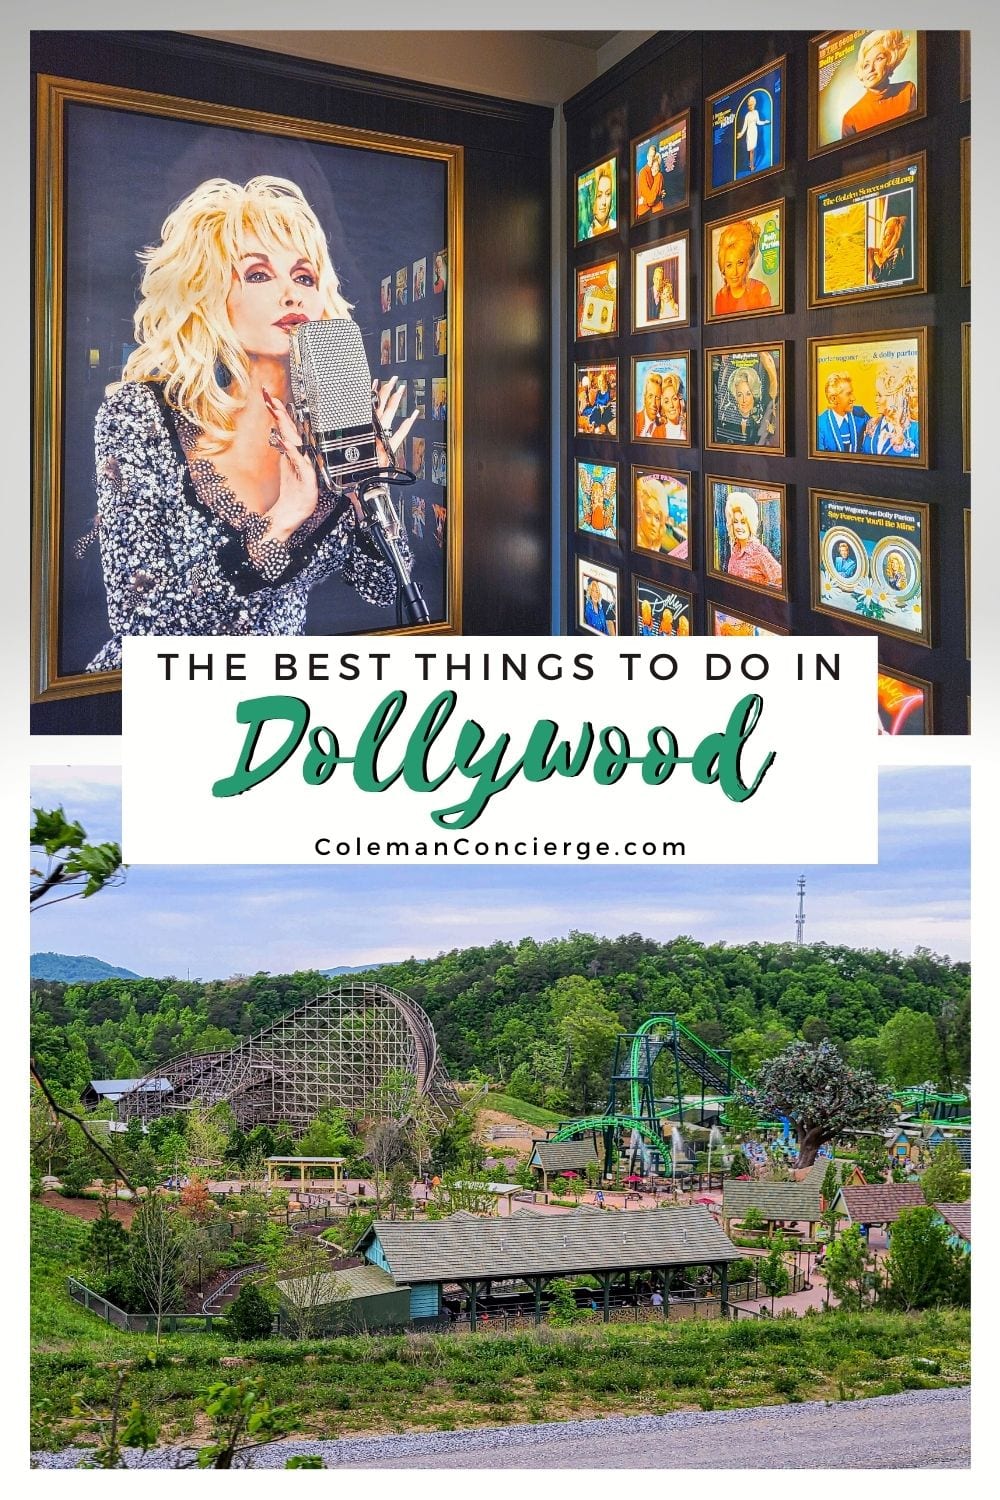 Image of Dolly Parton and Dollywood